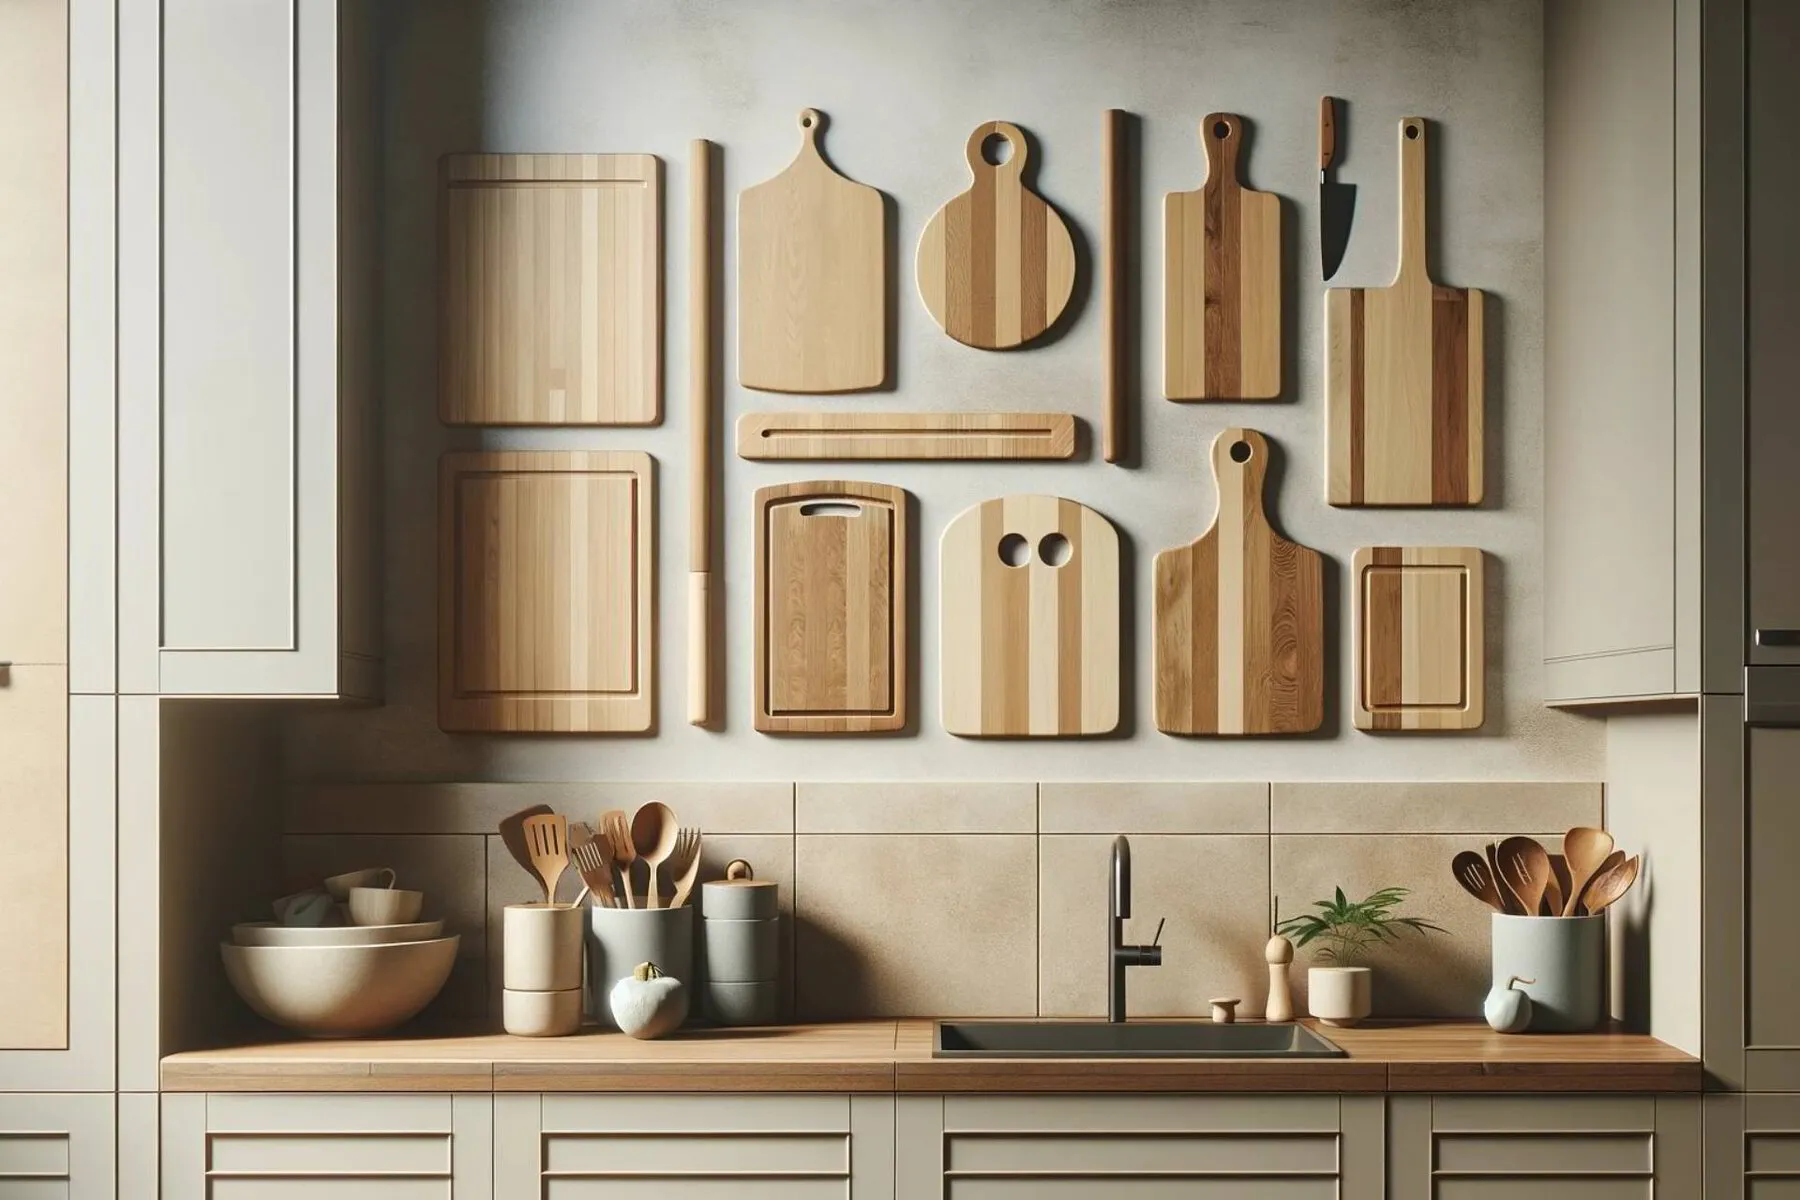 subtle and elegant kitchen decor, featuring a few cutting boards in varying shapes and sizes, tastefully arranged on a kitchen wall